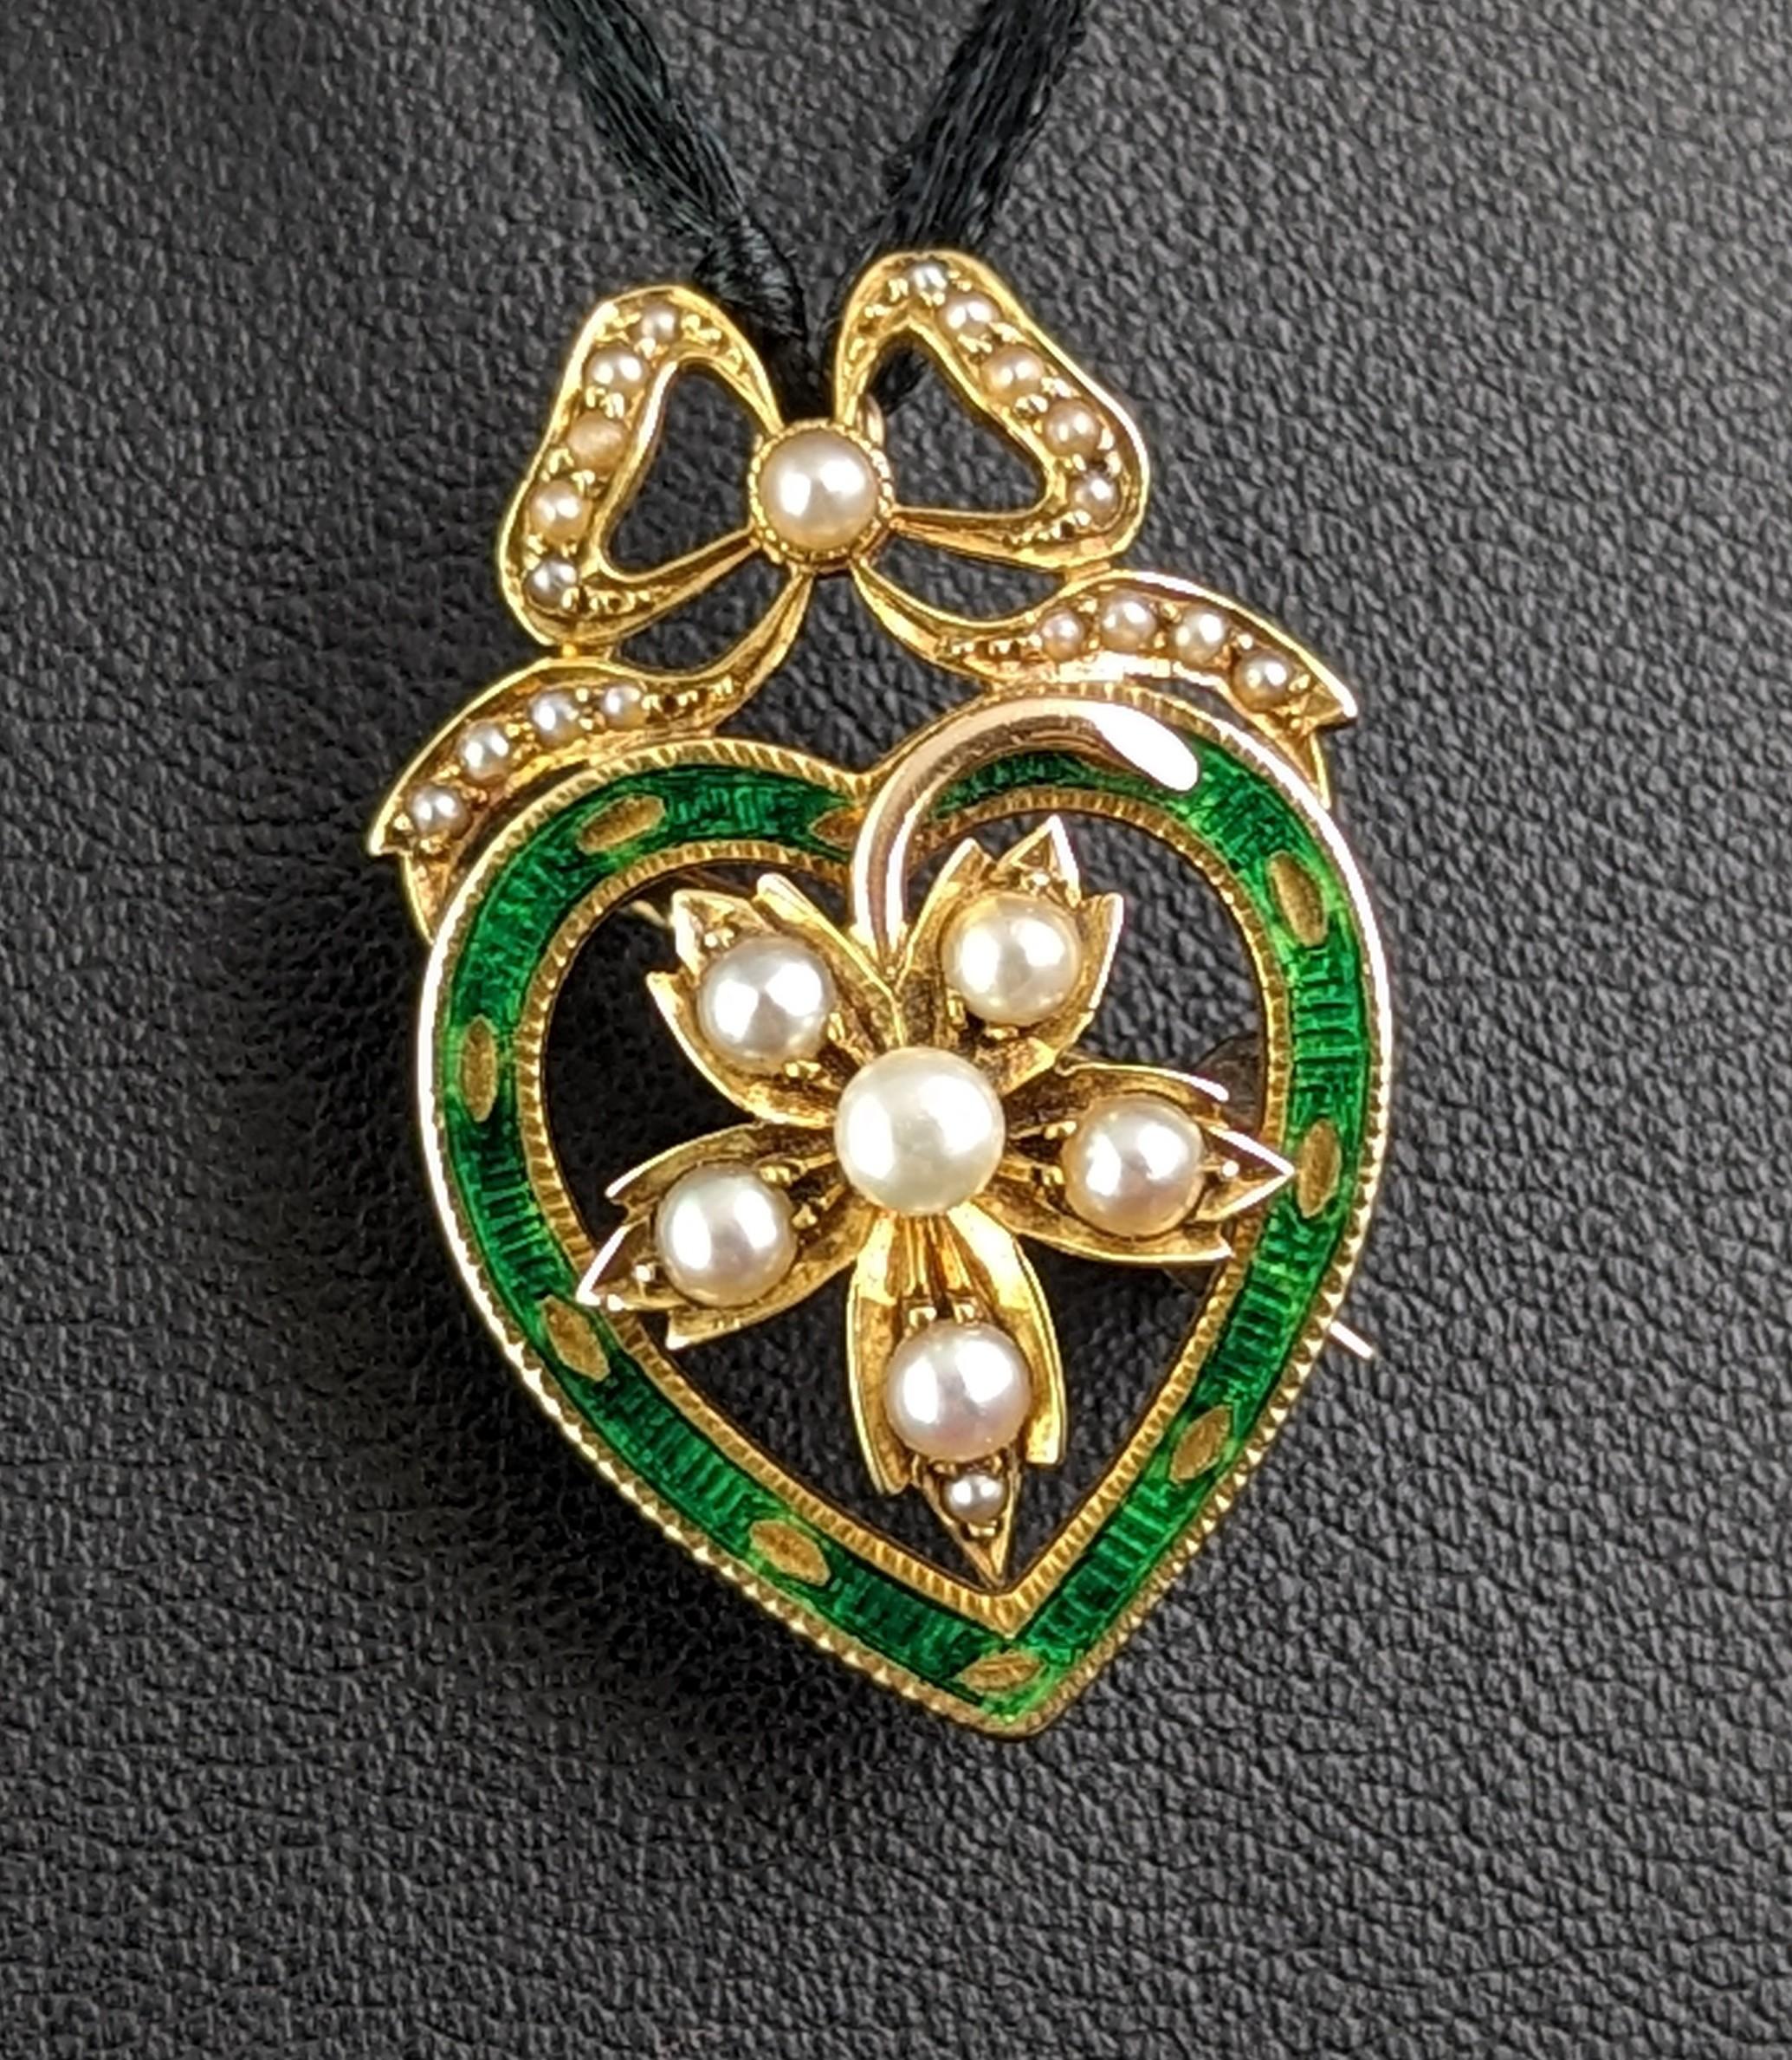 Antique Green Enamel and Pearl Heart pendant brooch, 9k yellow gold  For Sale 2